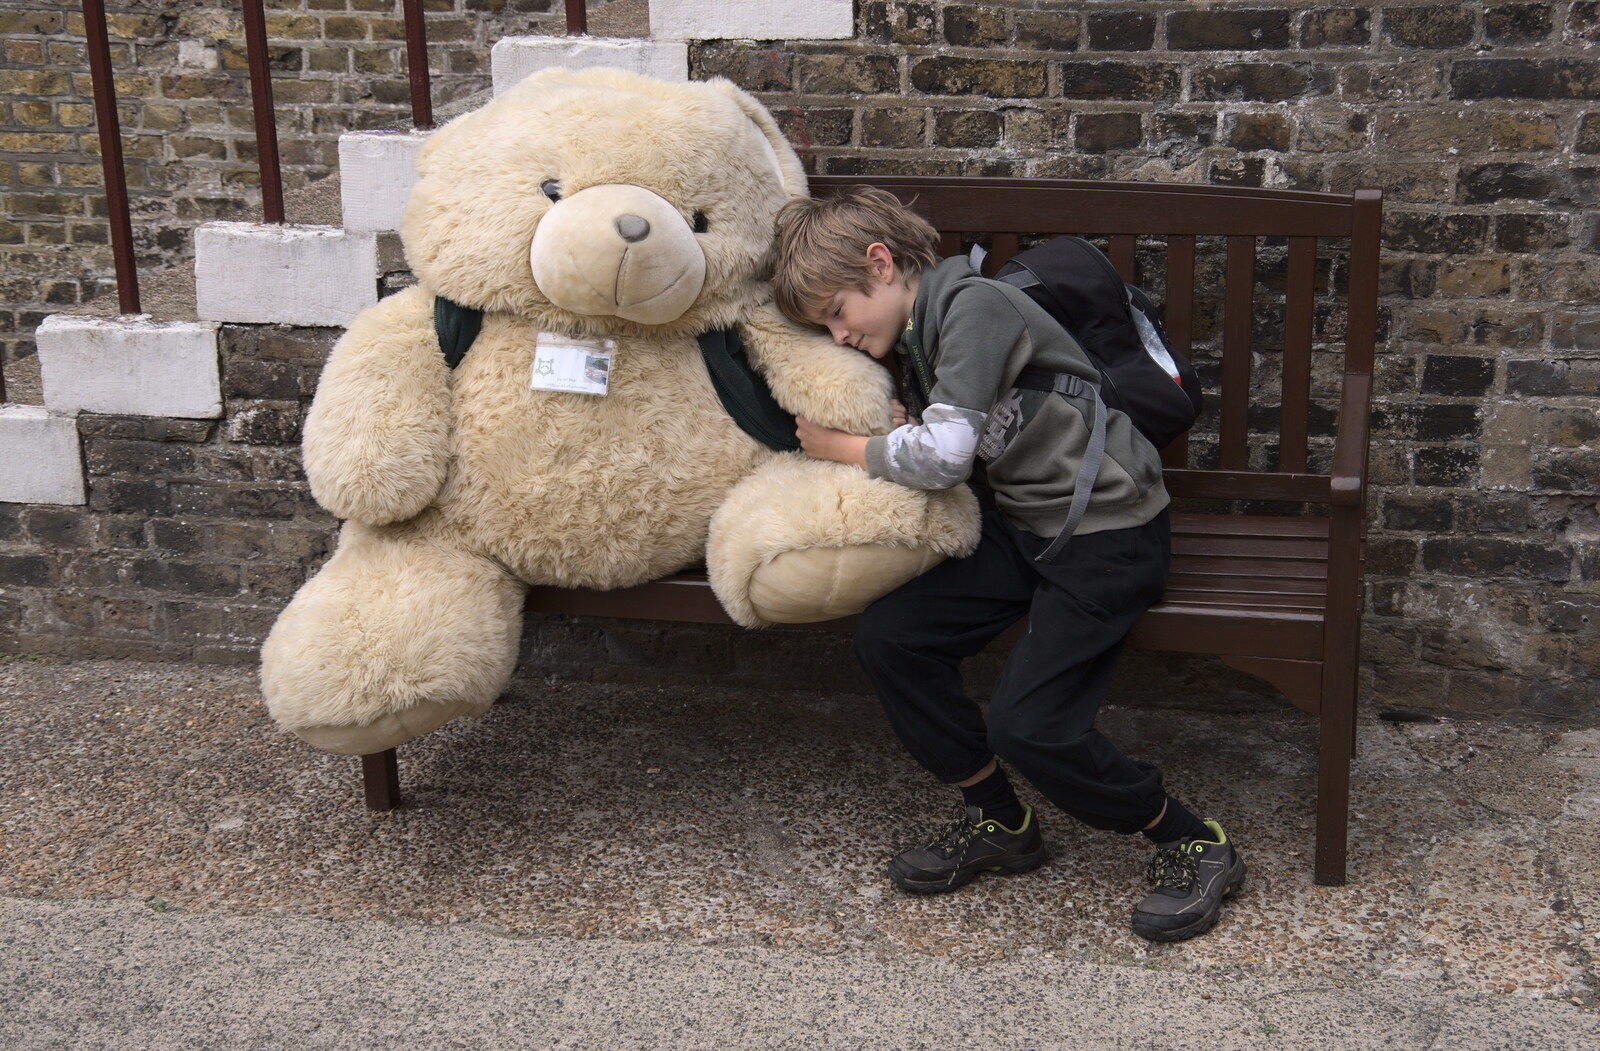 Harry gets another hug of the giant teddy bear from A Trip to Landguard Fort, Felixstowe, Suffolk - 16th October 2022